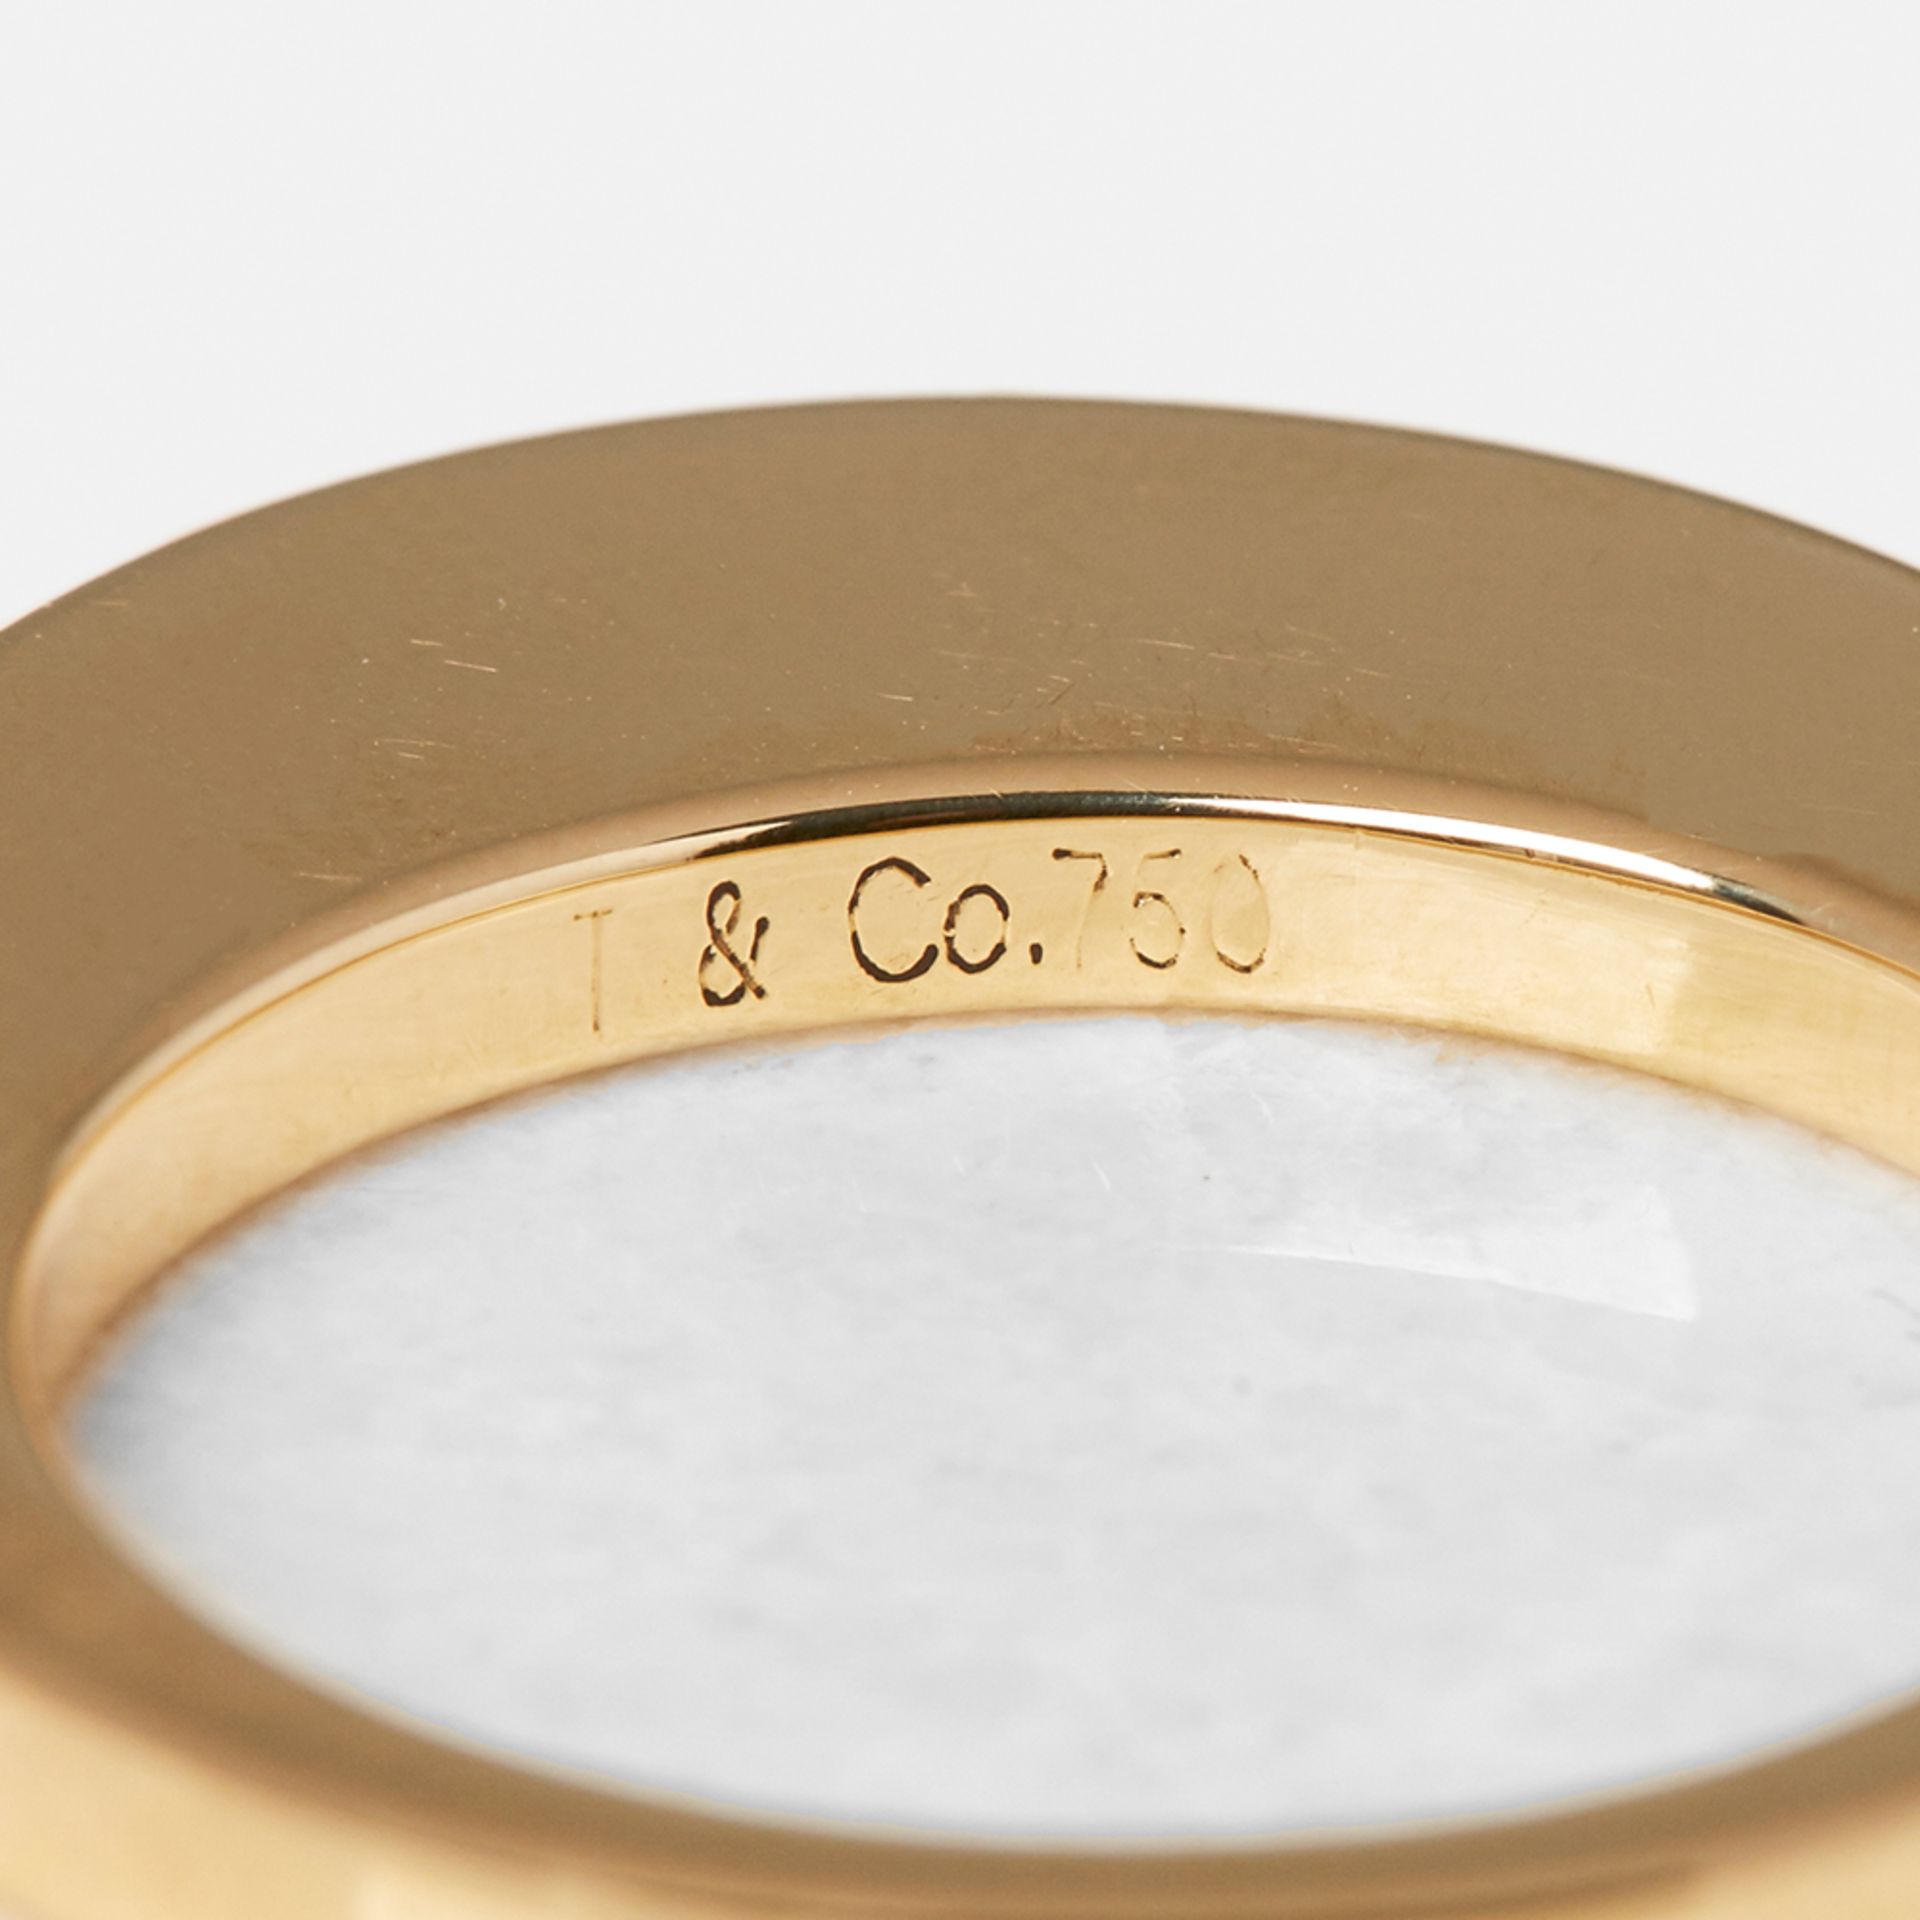 Tiffany & Co. 18k White, Rose & Yellow Gold Stackable Rings - Image 7 of 10